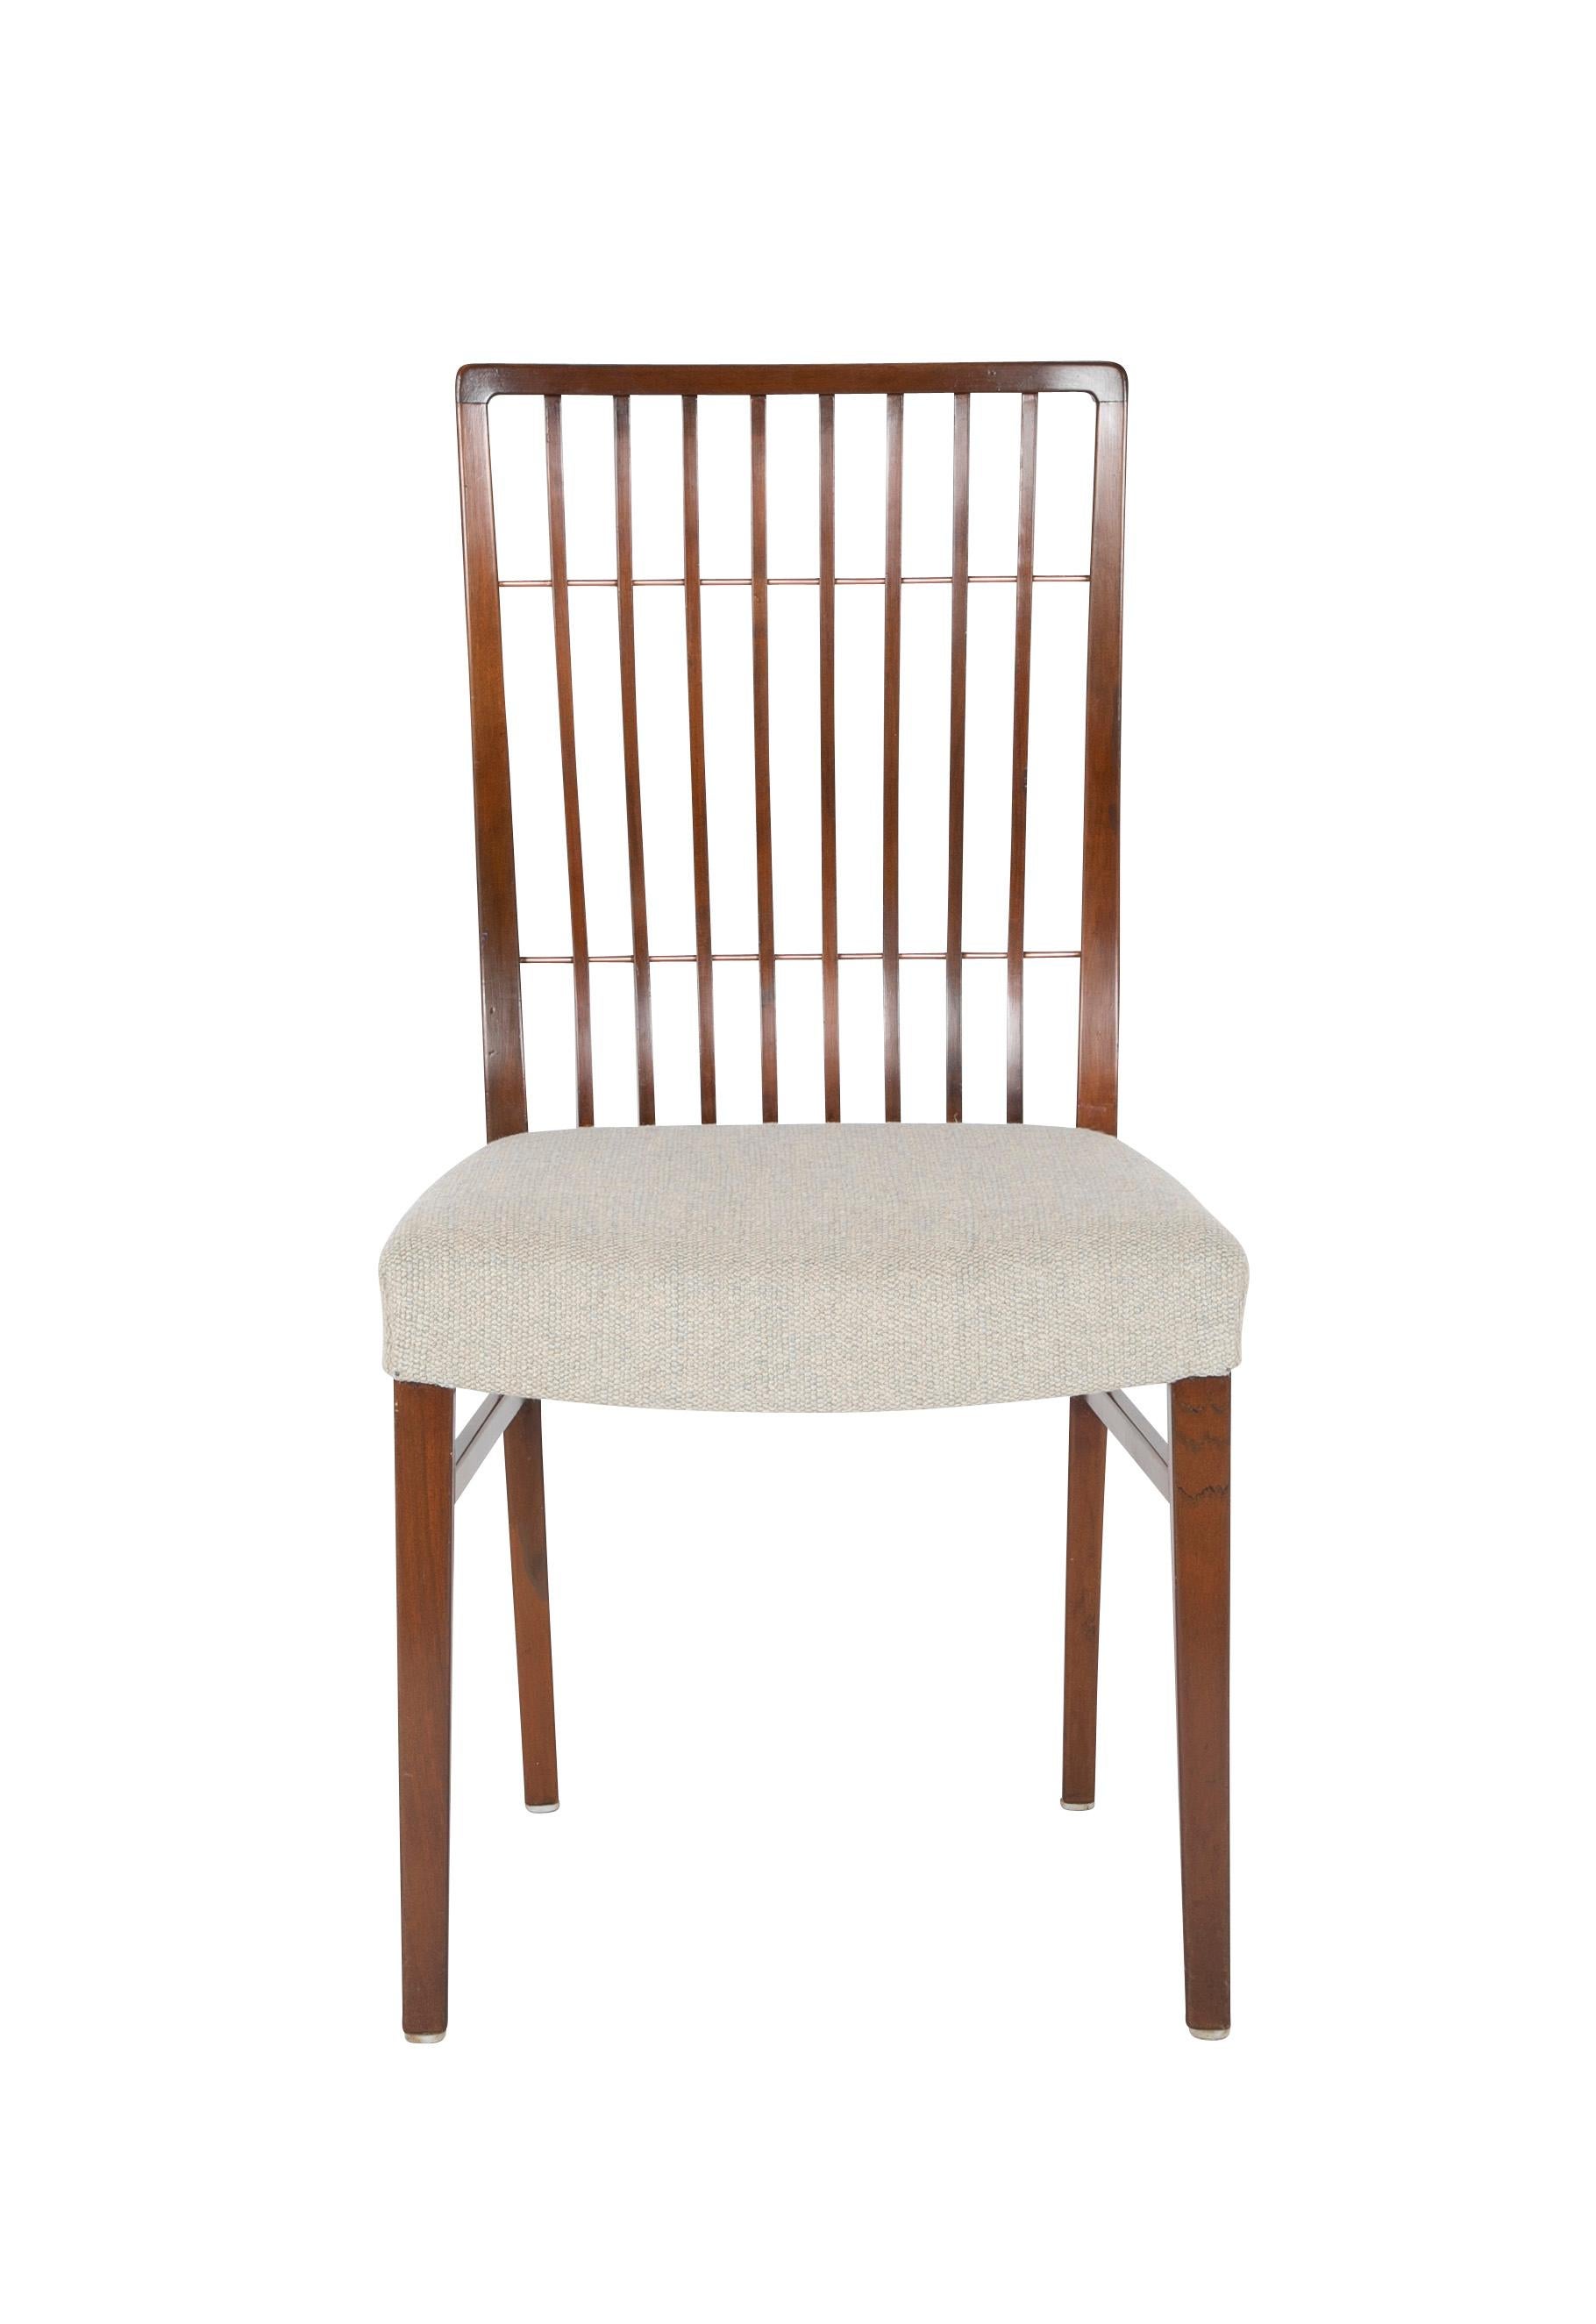 Set of 8 Mid-Century Danish dining chairs of mahogany with copper accents.